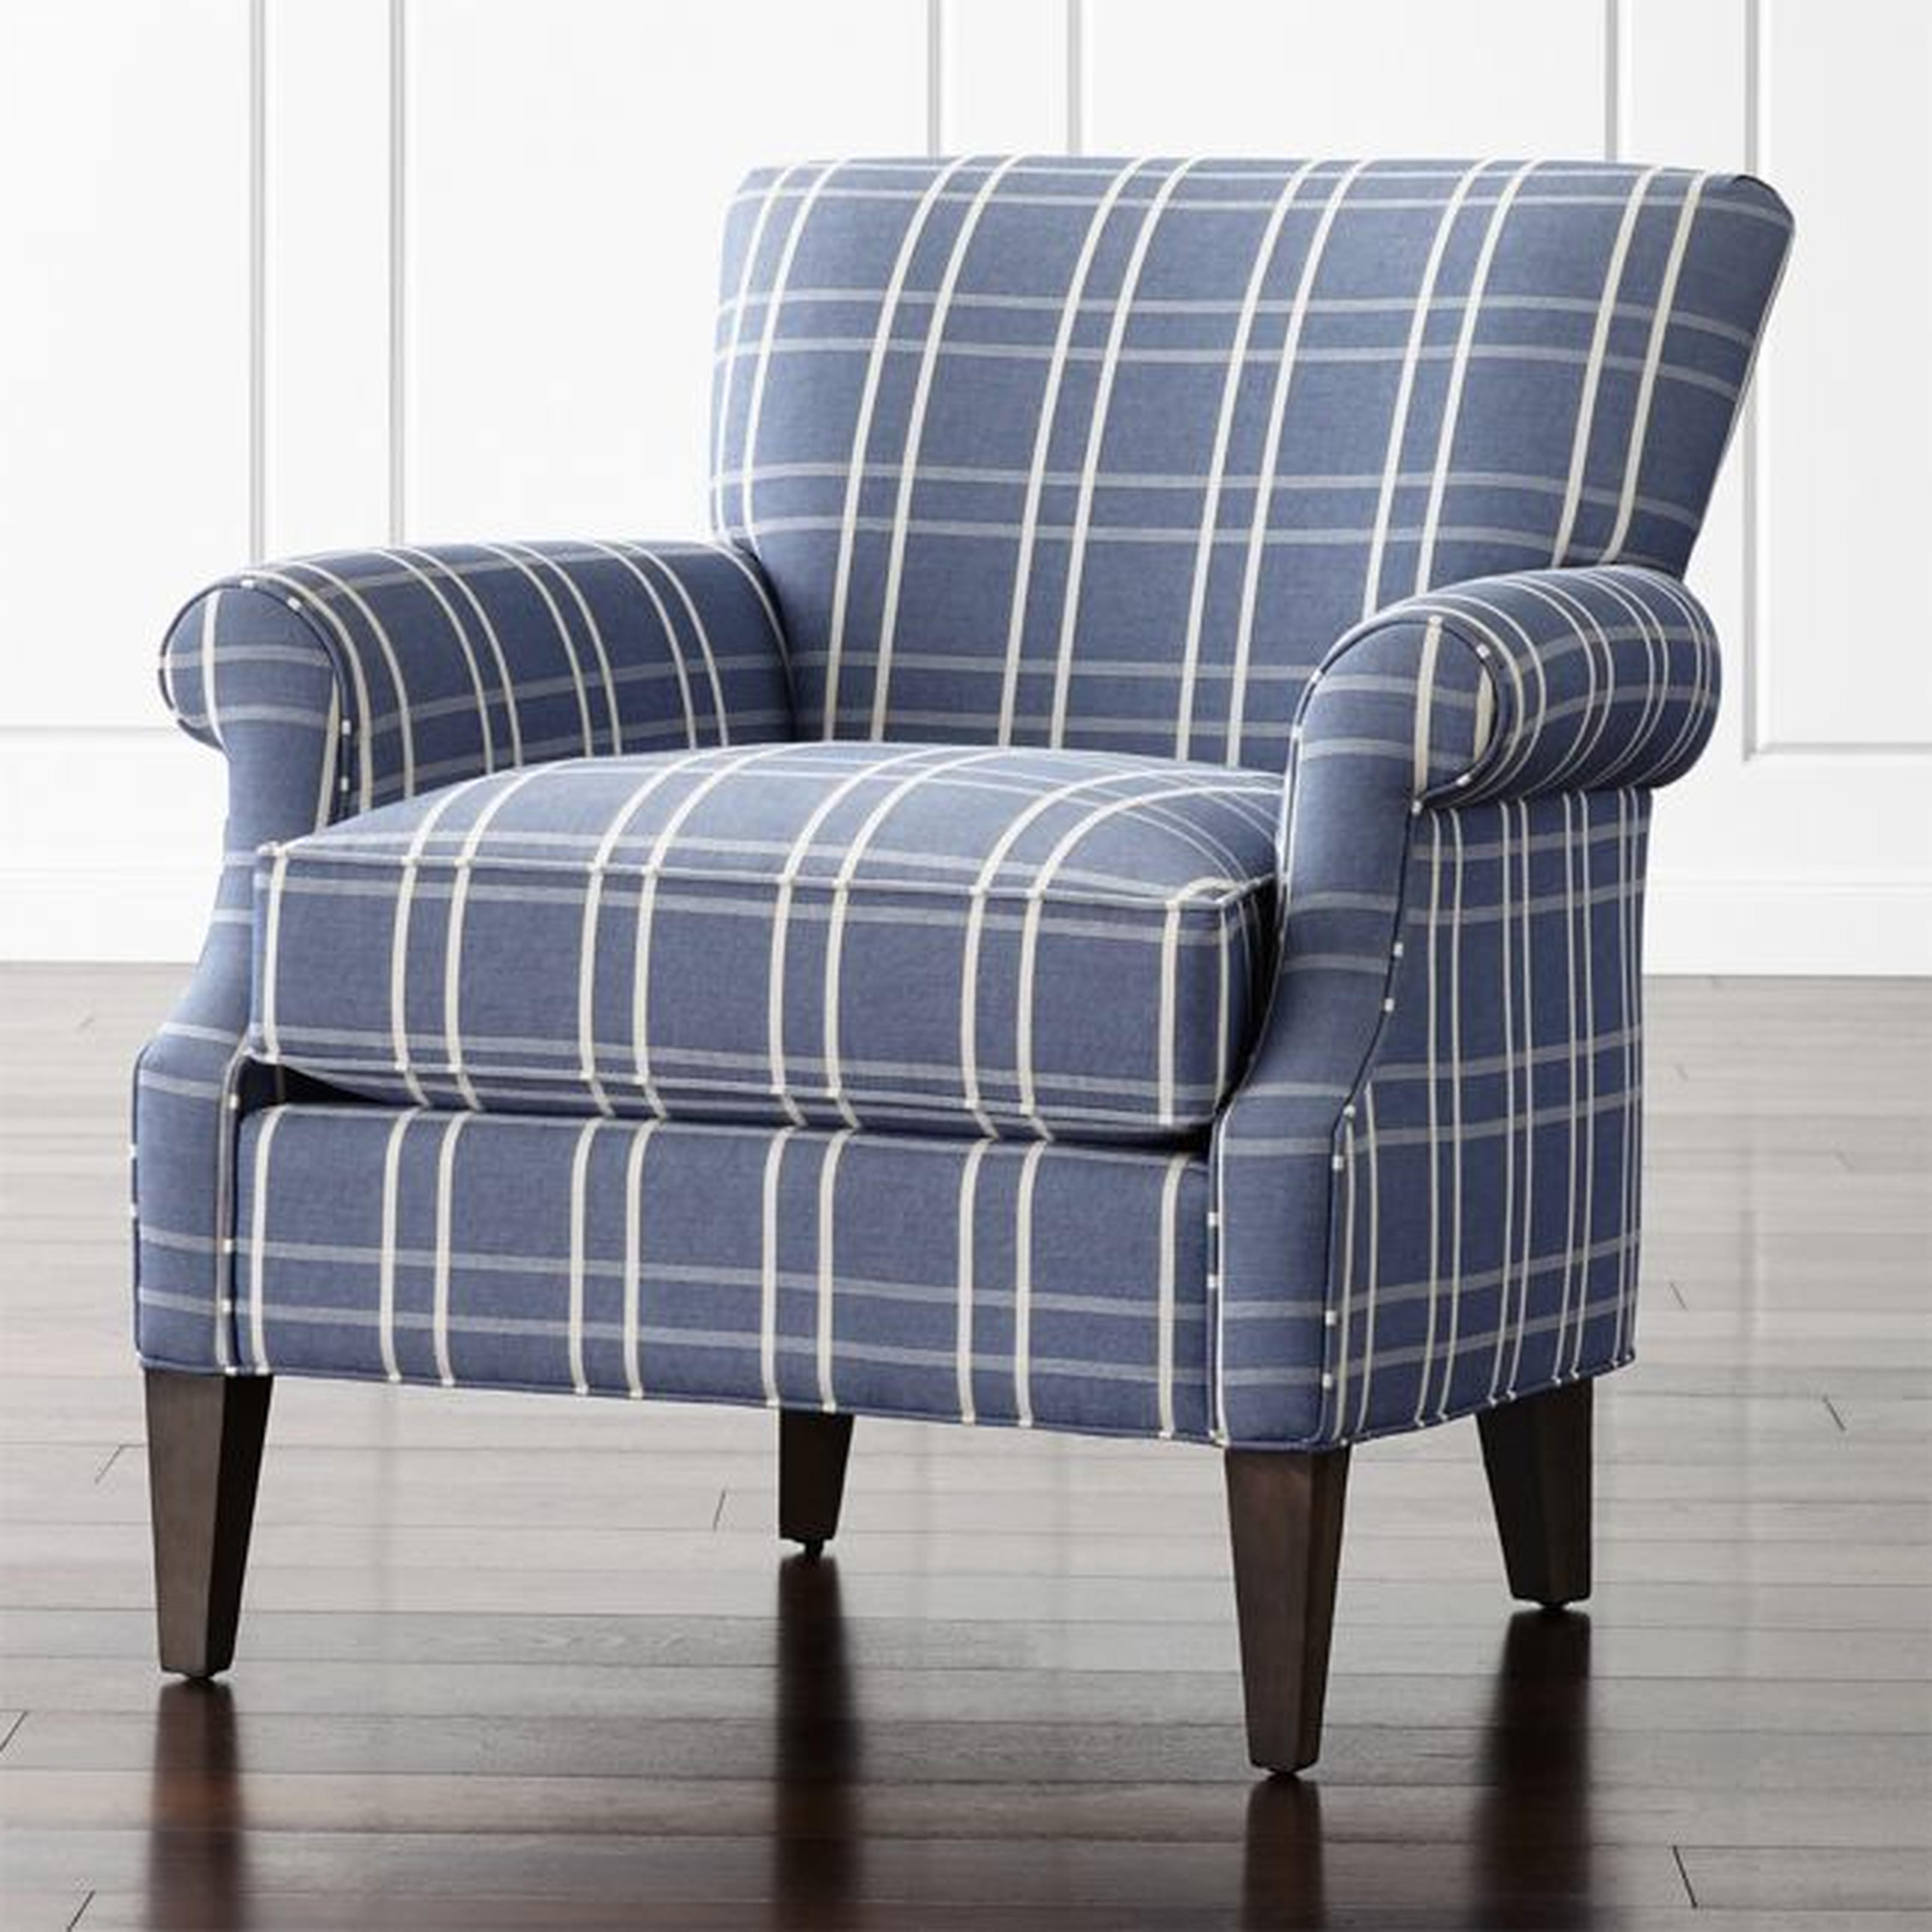 Elyse Chair - Crate and Barrel